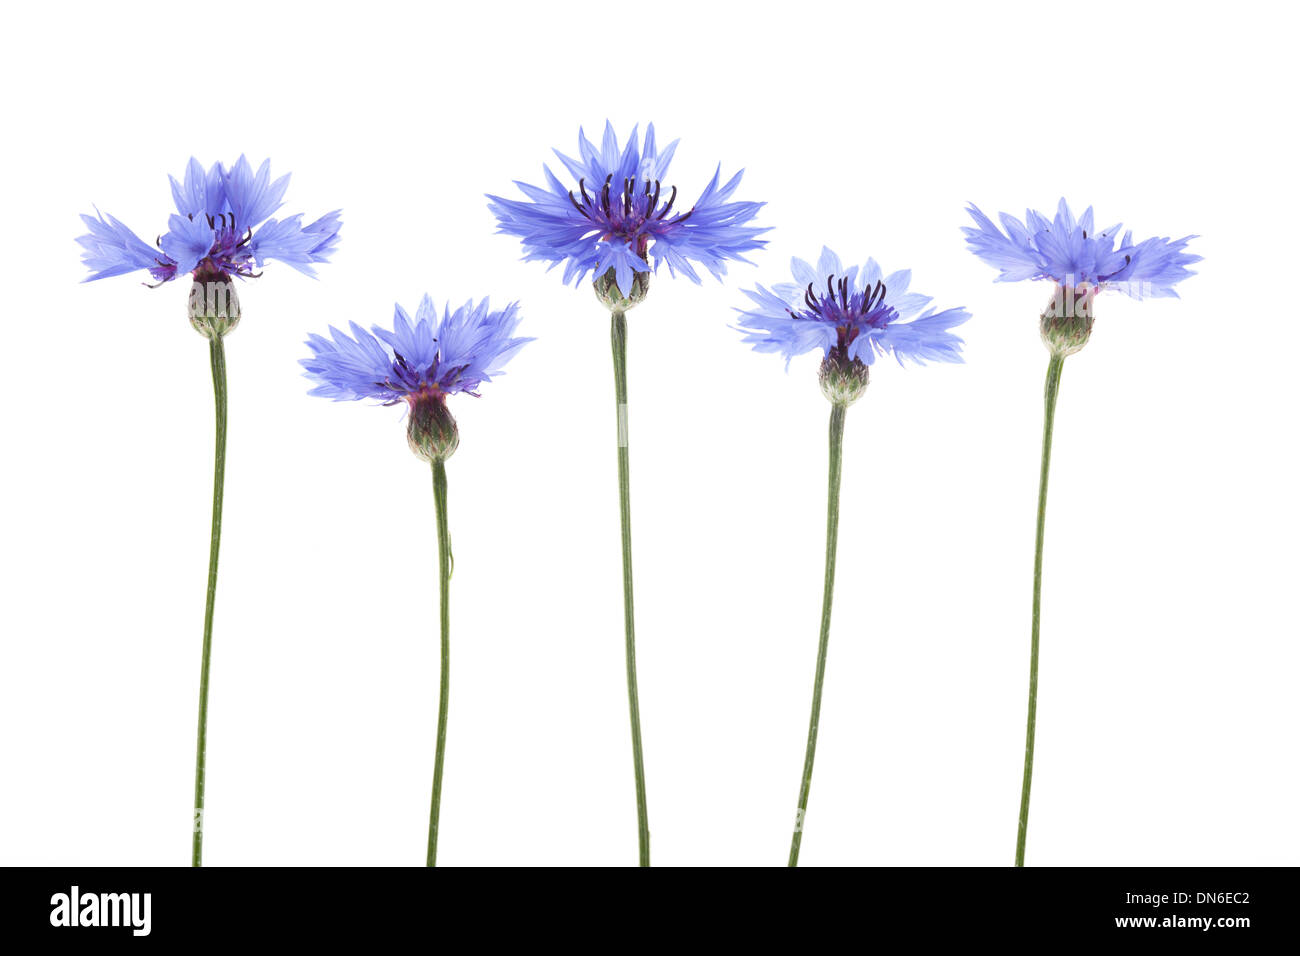 Blue Cornflower Flowers arranged in a row isolated on white background with shallow depth of field. Stock Photo